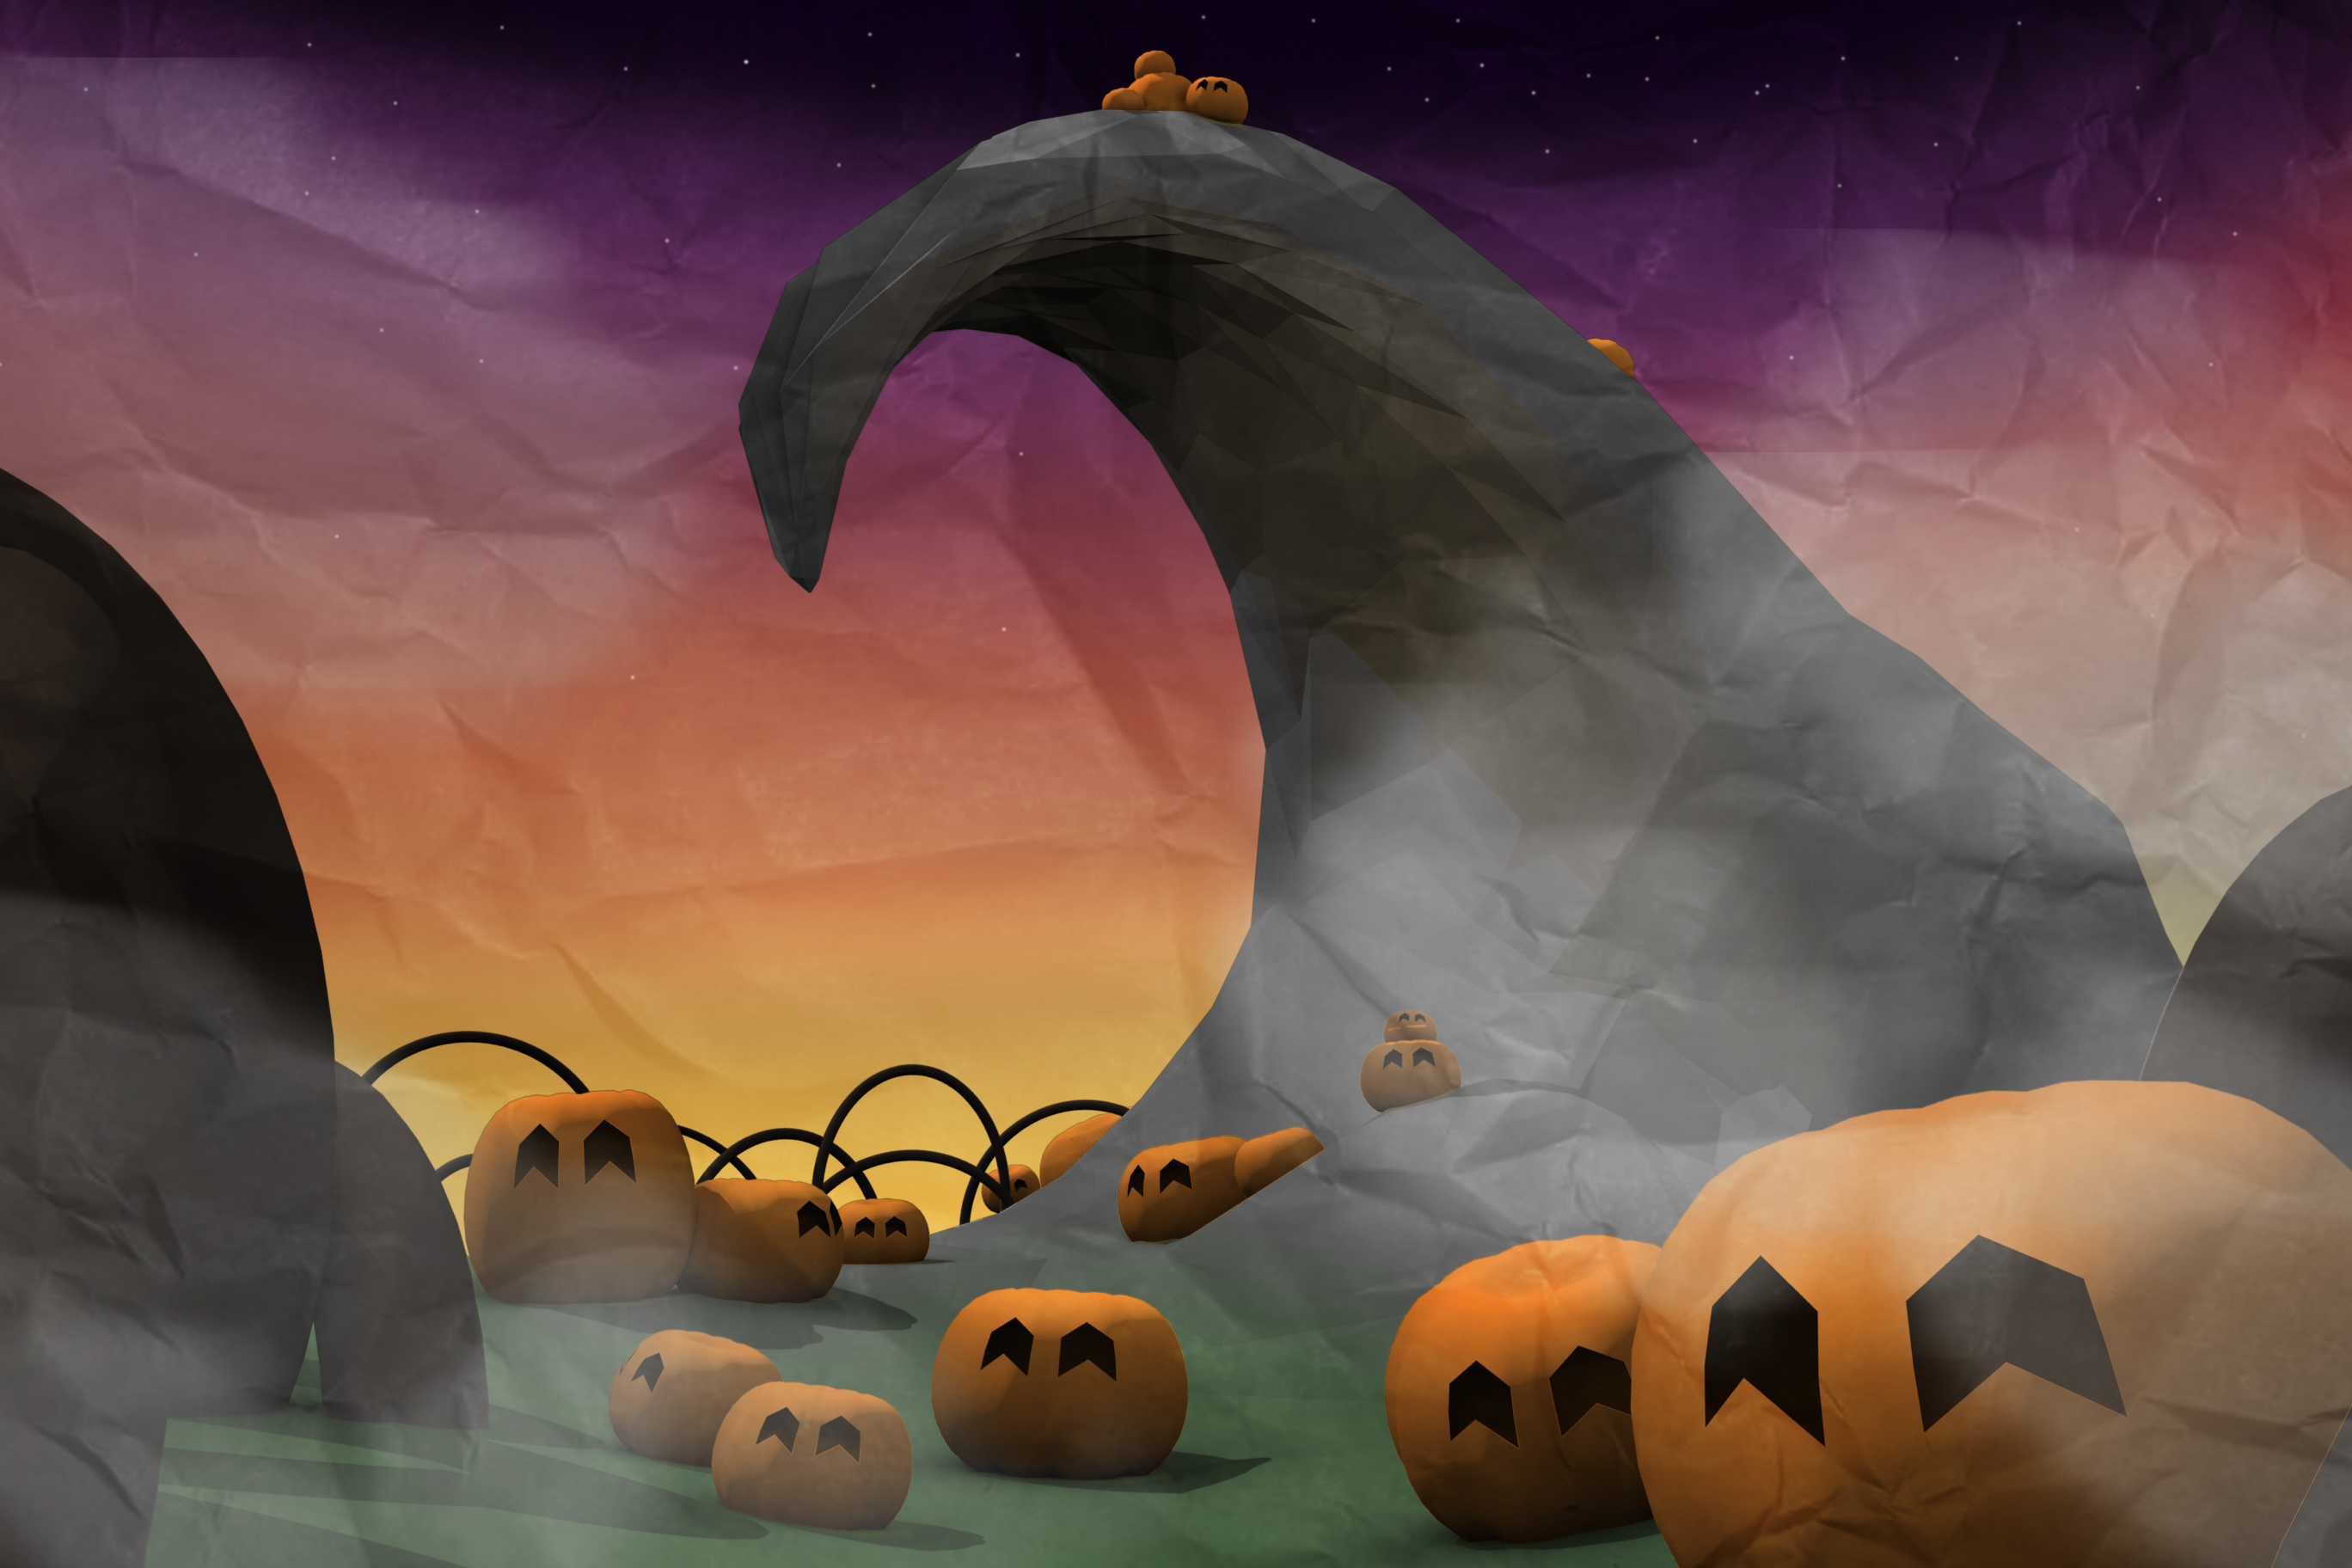 A low-poly 3D model of a Halloween-themed landscape